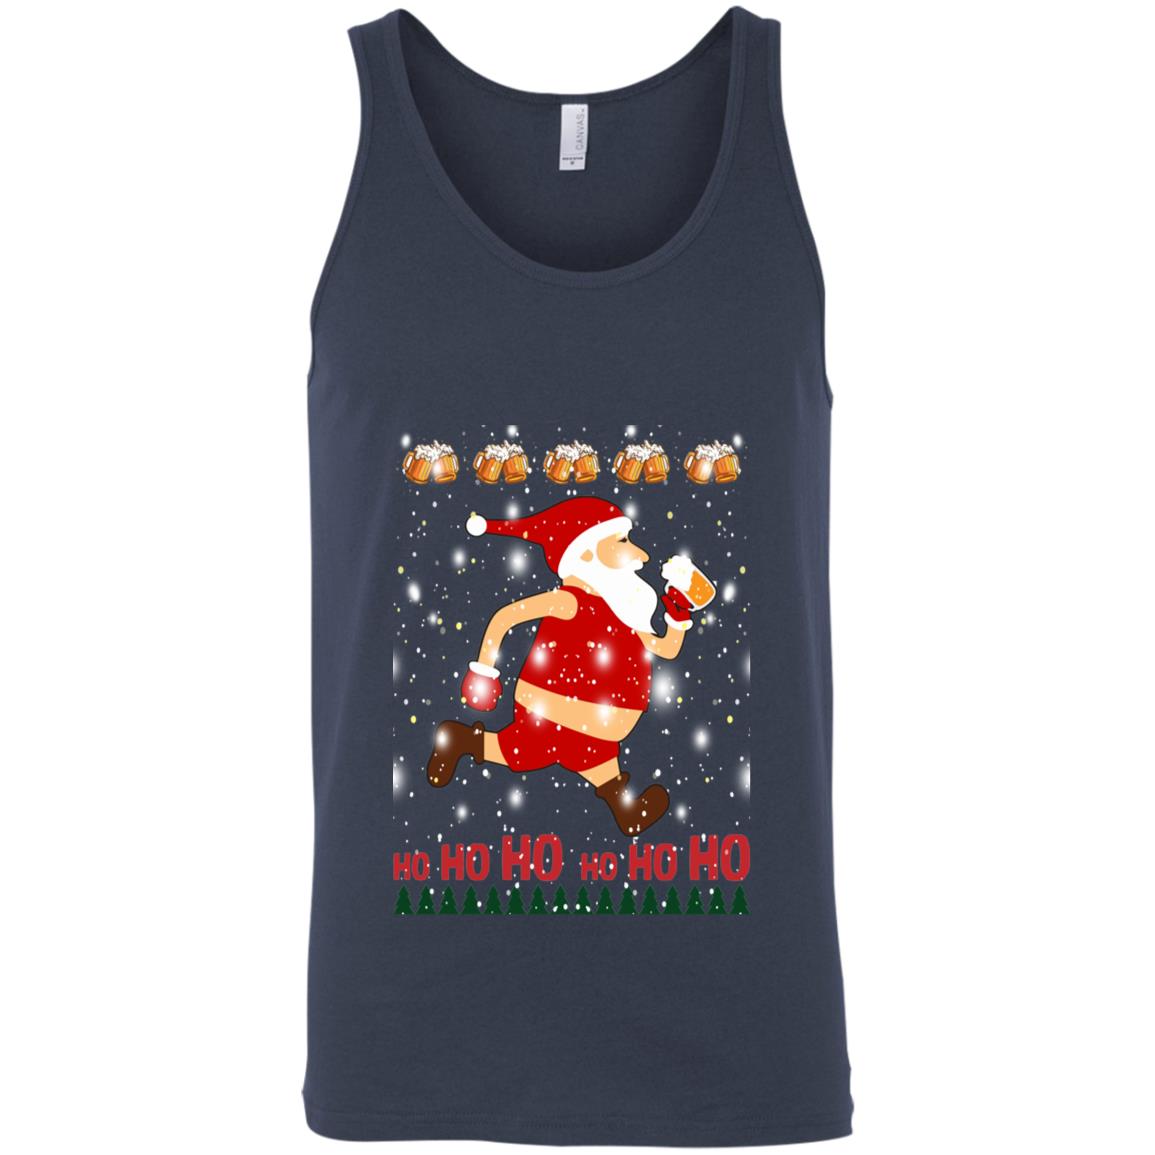 Santa Claus Drinks Beer On Christmas Day Sweater Shirt